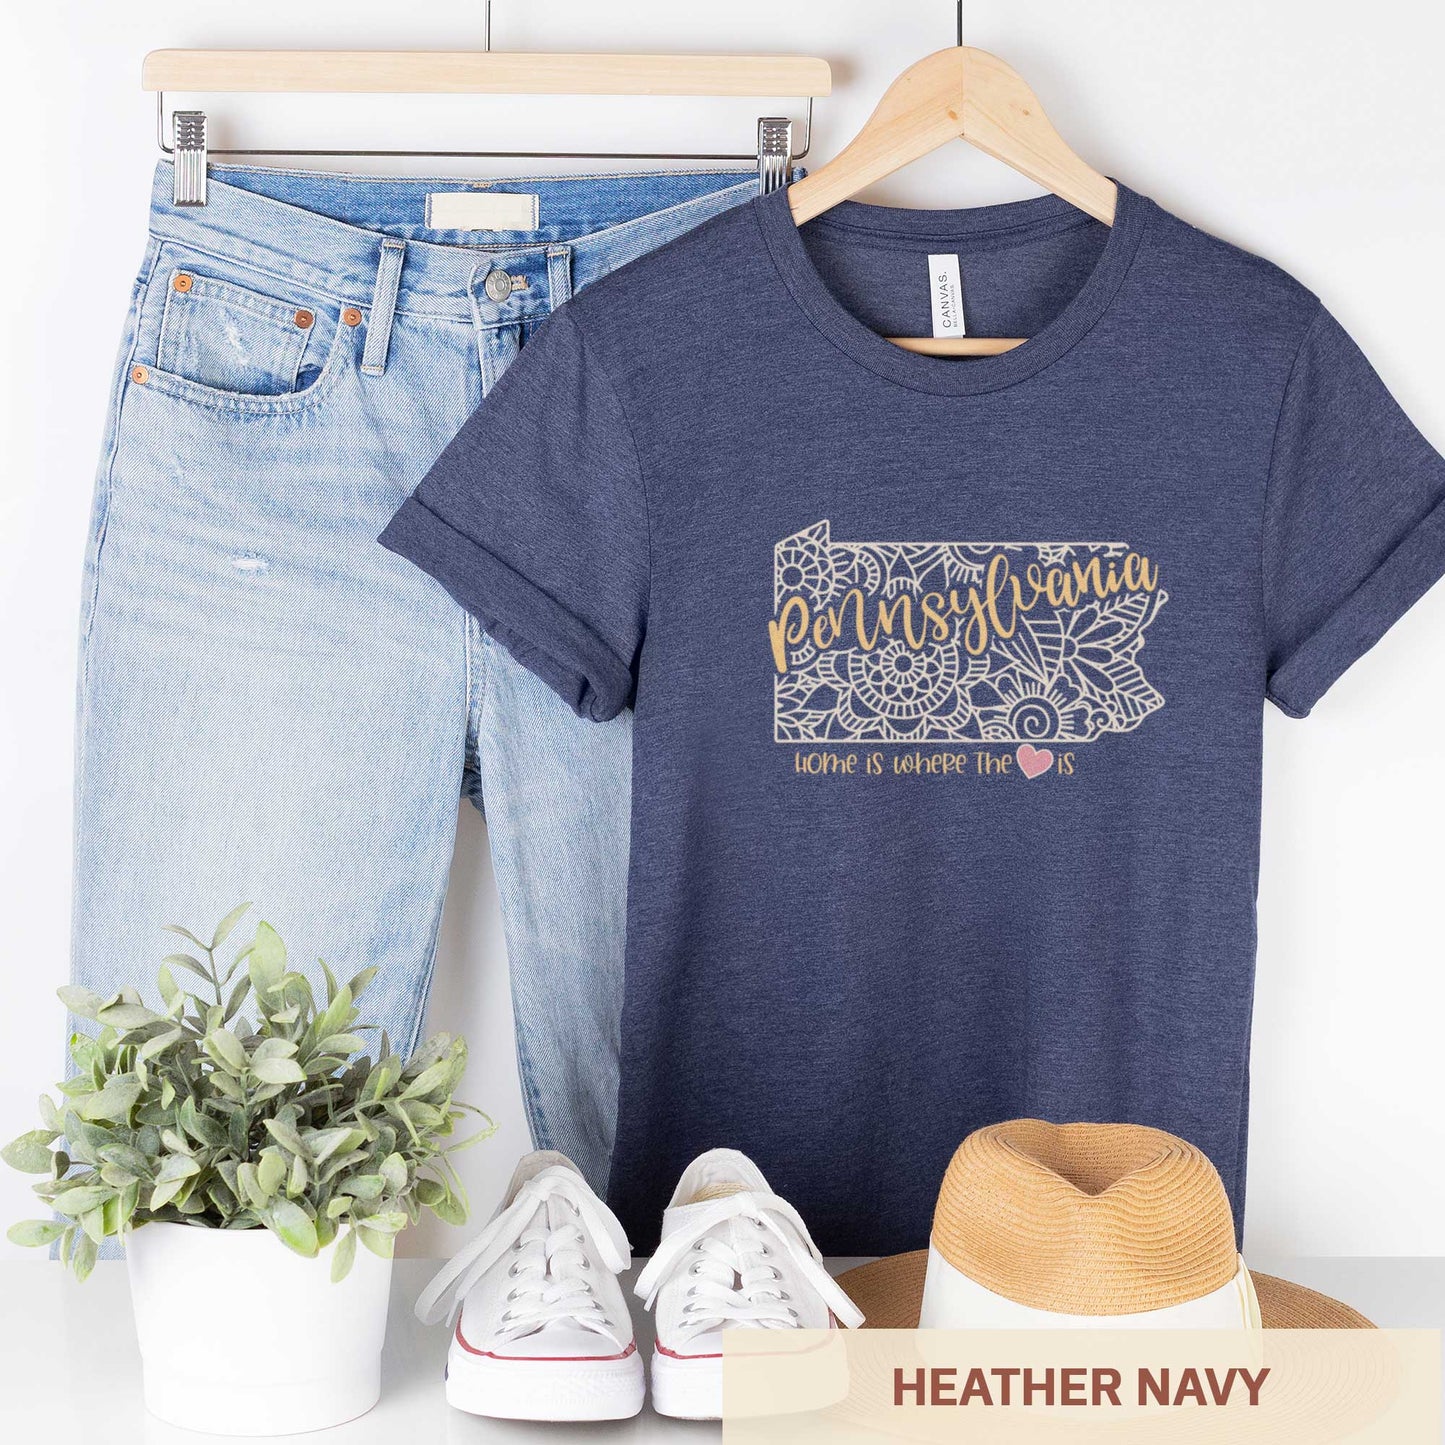 A hanging heather navy Bella Canvas t-shirt featuring a mandala in the shape of Pennsylvania with the words home is where the heart is.